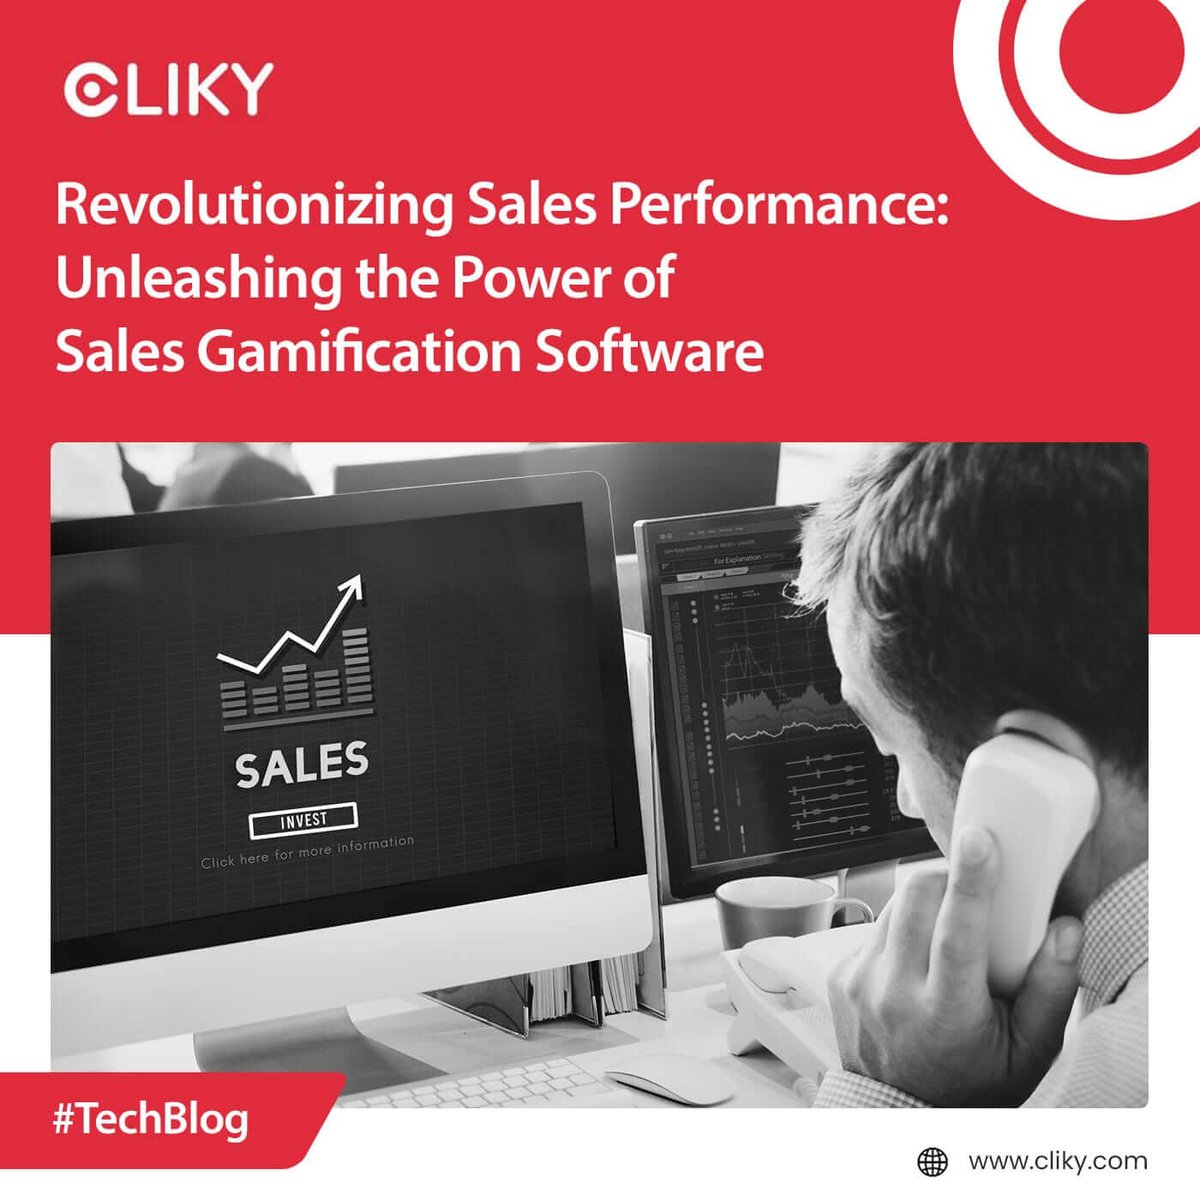 Revolutionizing Sales Performance: Unleashing the Power of Sales Gamification Software

To know more, read here : tinyurl.com/mwrsa5ye

#Revolutionizing #Sales #Gamification  #Software #Leaderboards  #SocialIntegration #CustomizableGoals #IncreasedMotivation #cliky